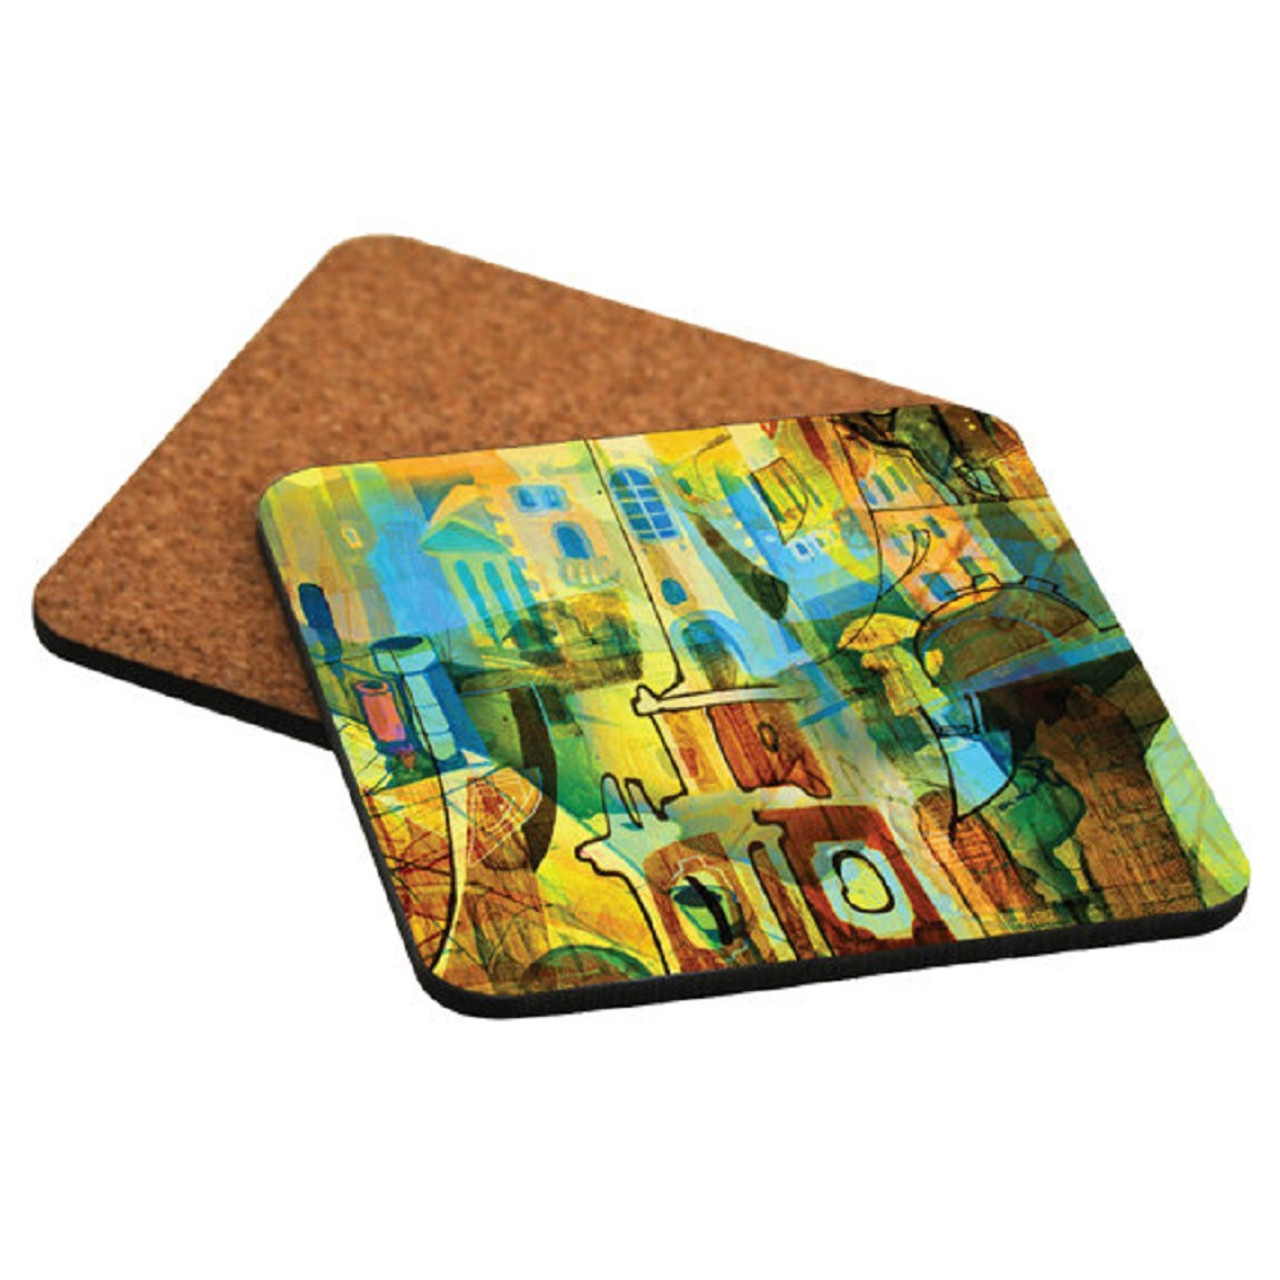 Coaster Dye Sublimation Blank with Cork Bottom - 3.75in Square